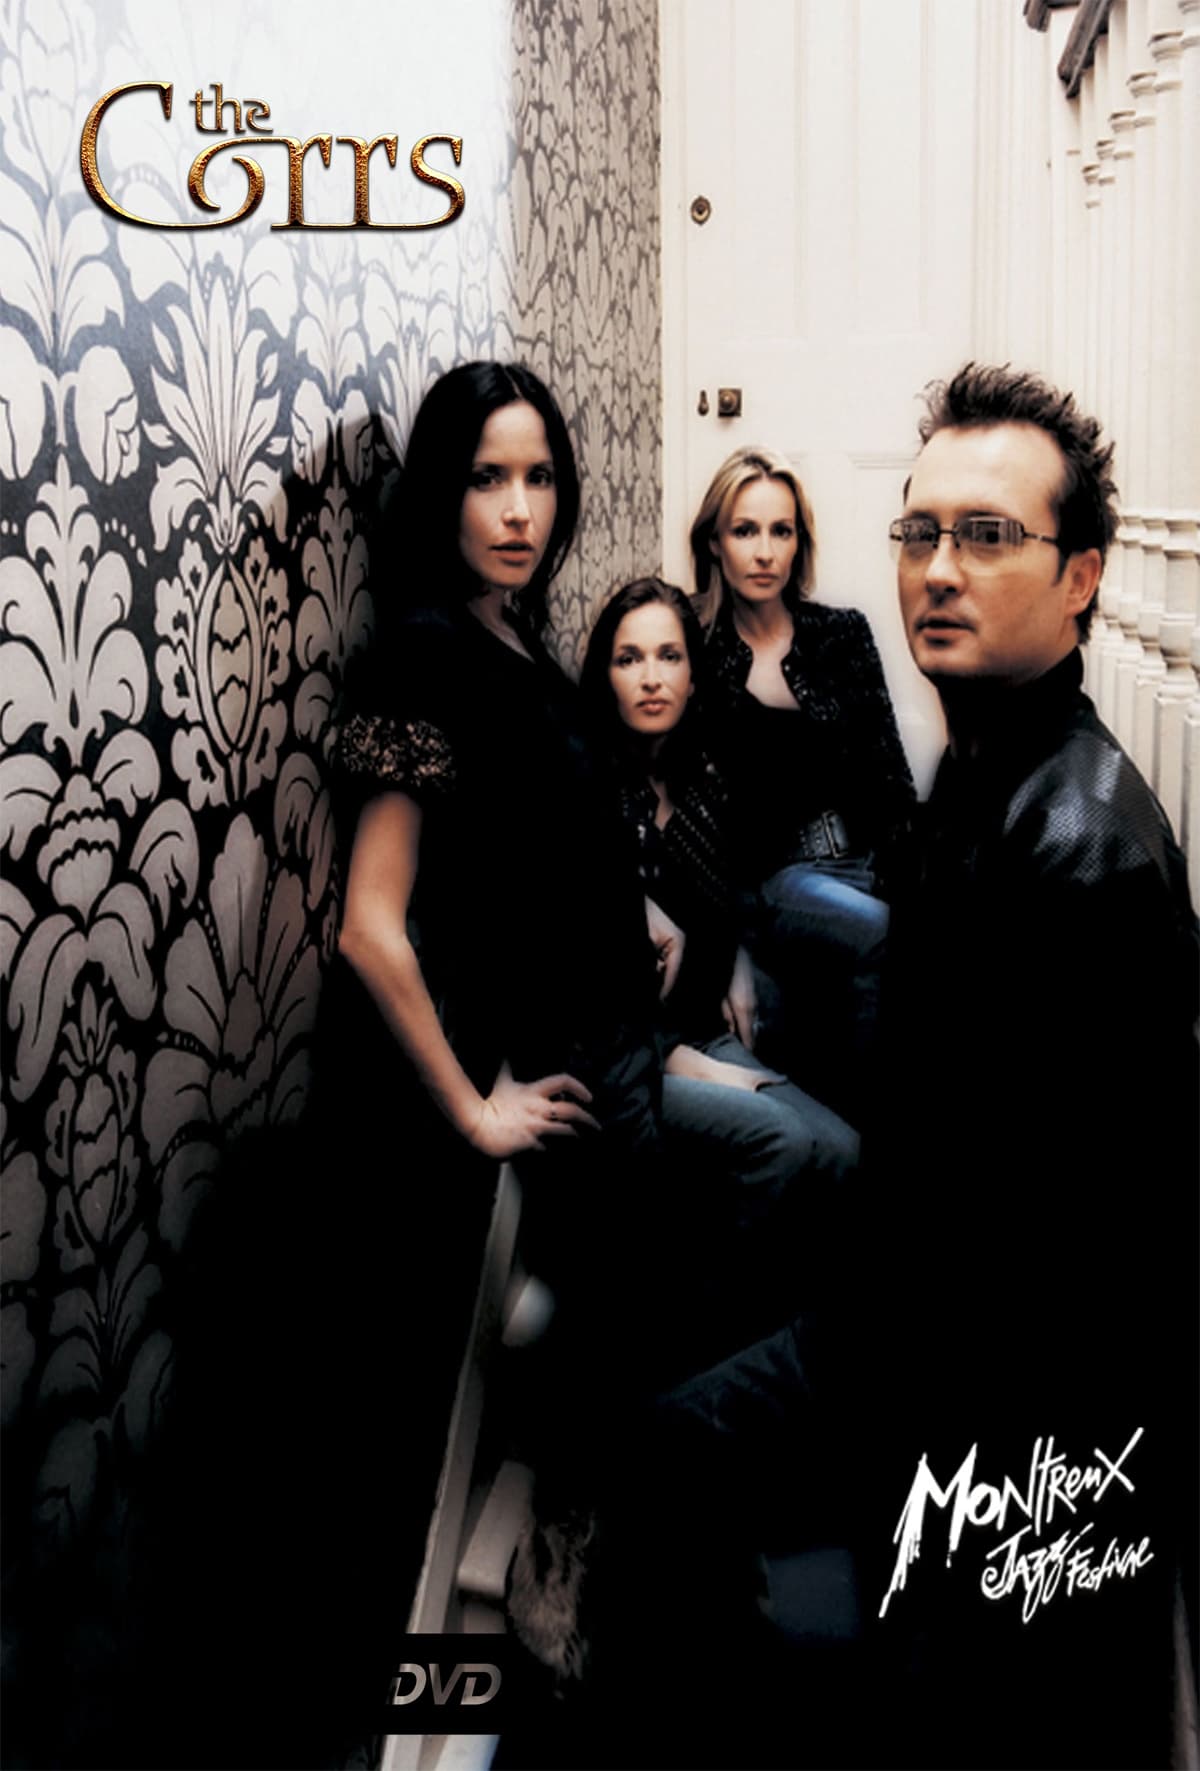 The Corrs - Live in Montreux Jazz Festival